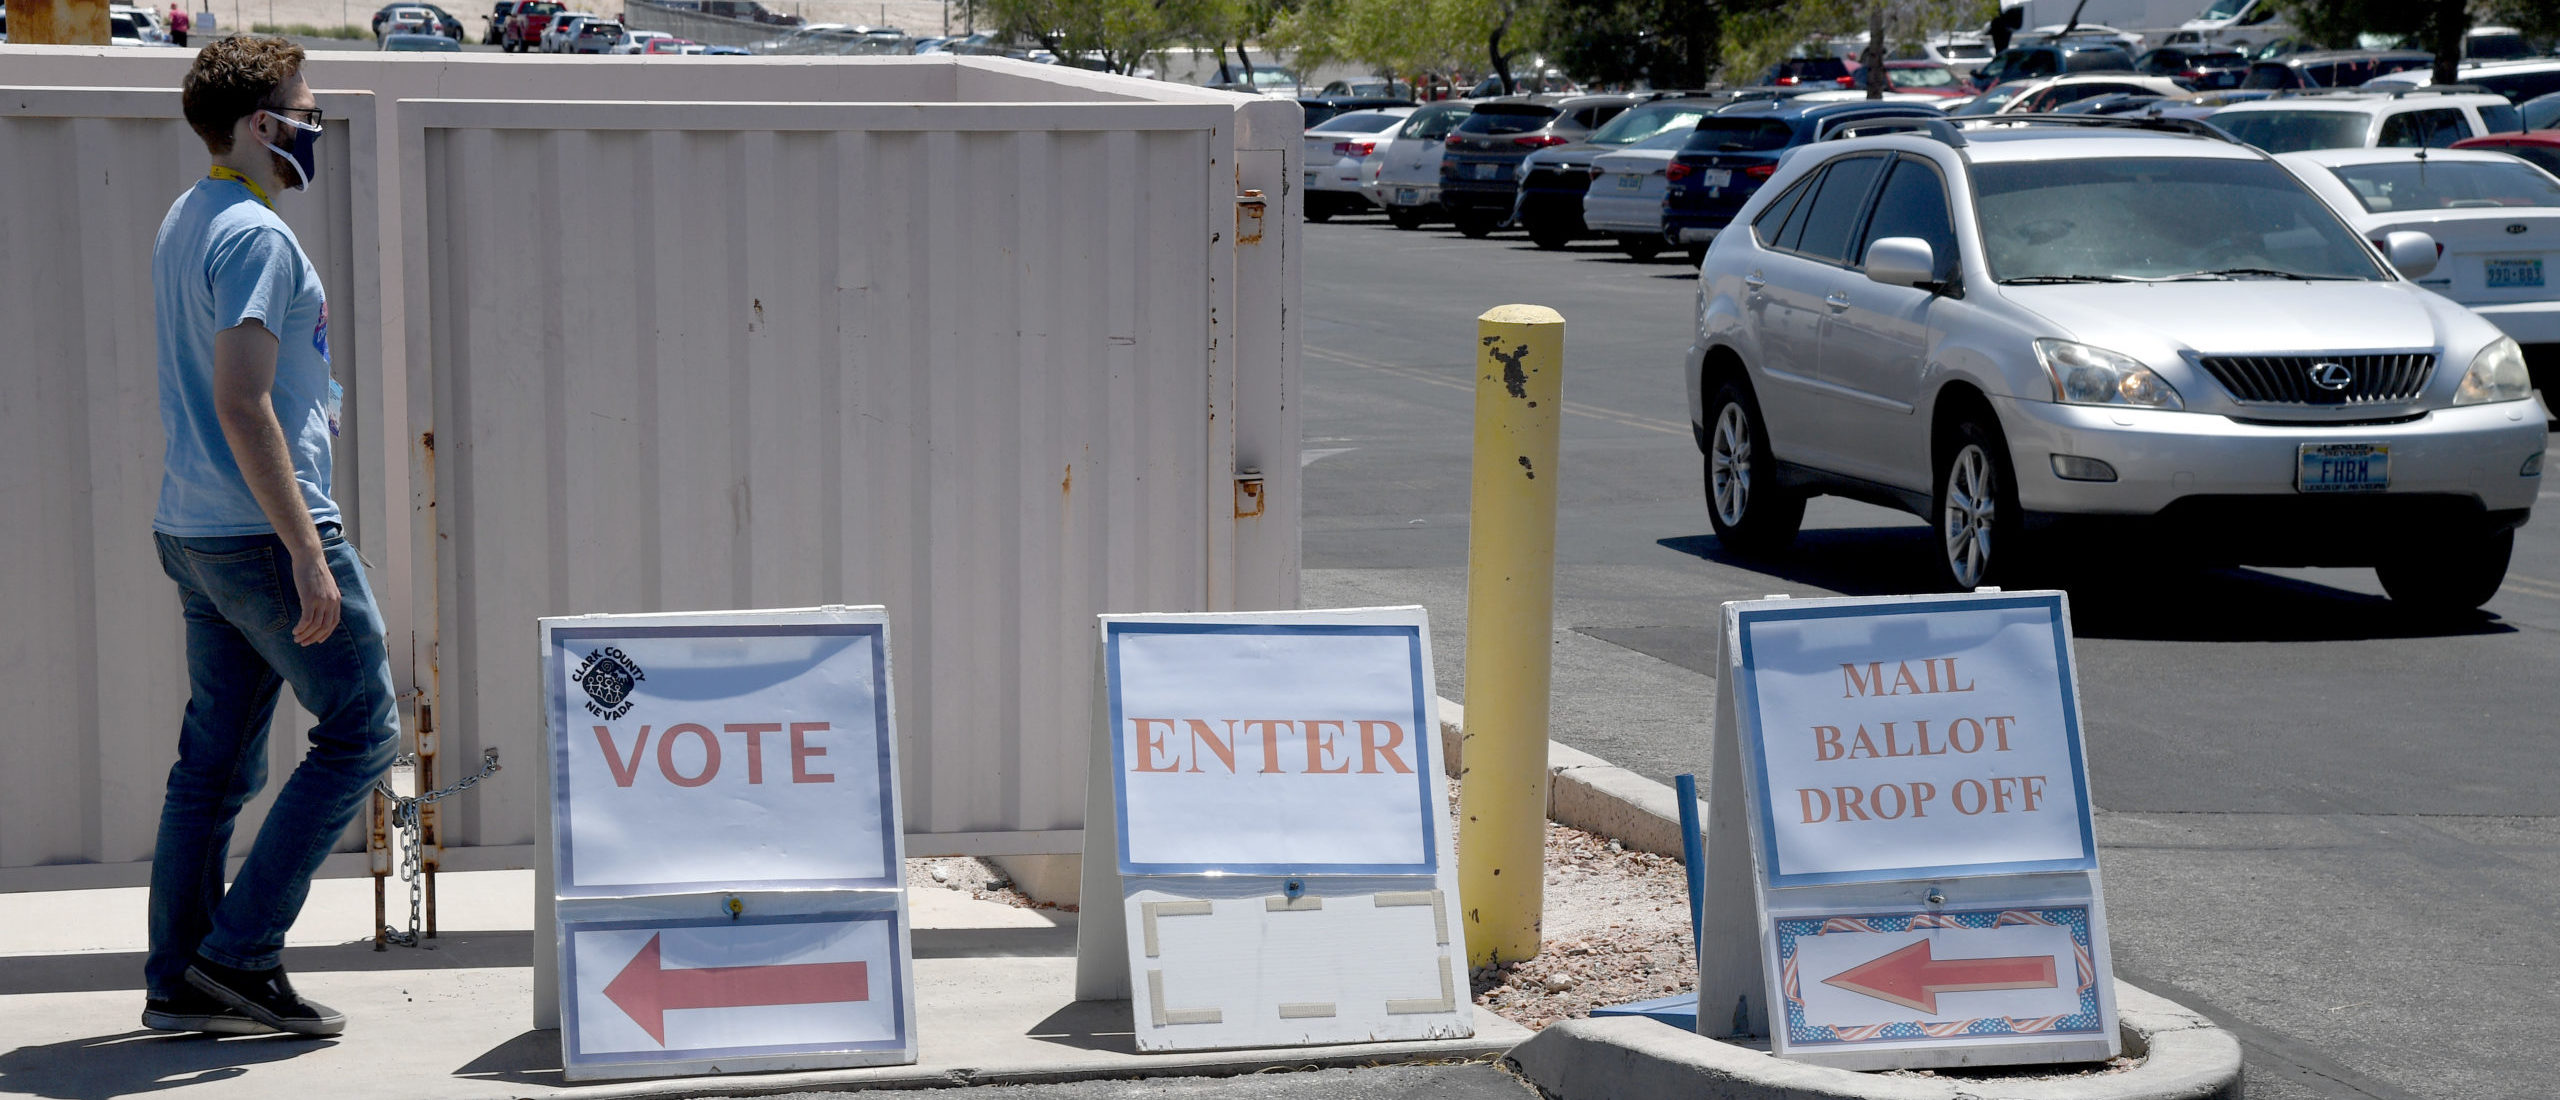 Nevada To Hold First Presidential Primary Of 2024 Election Cycle The